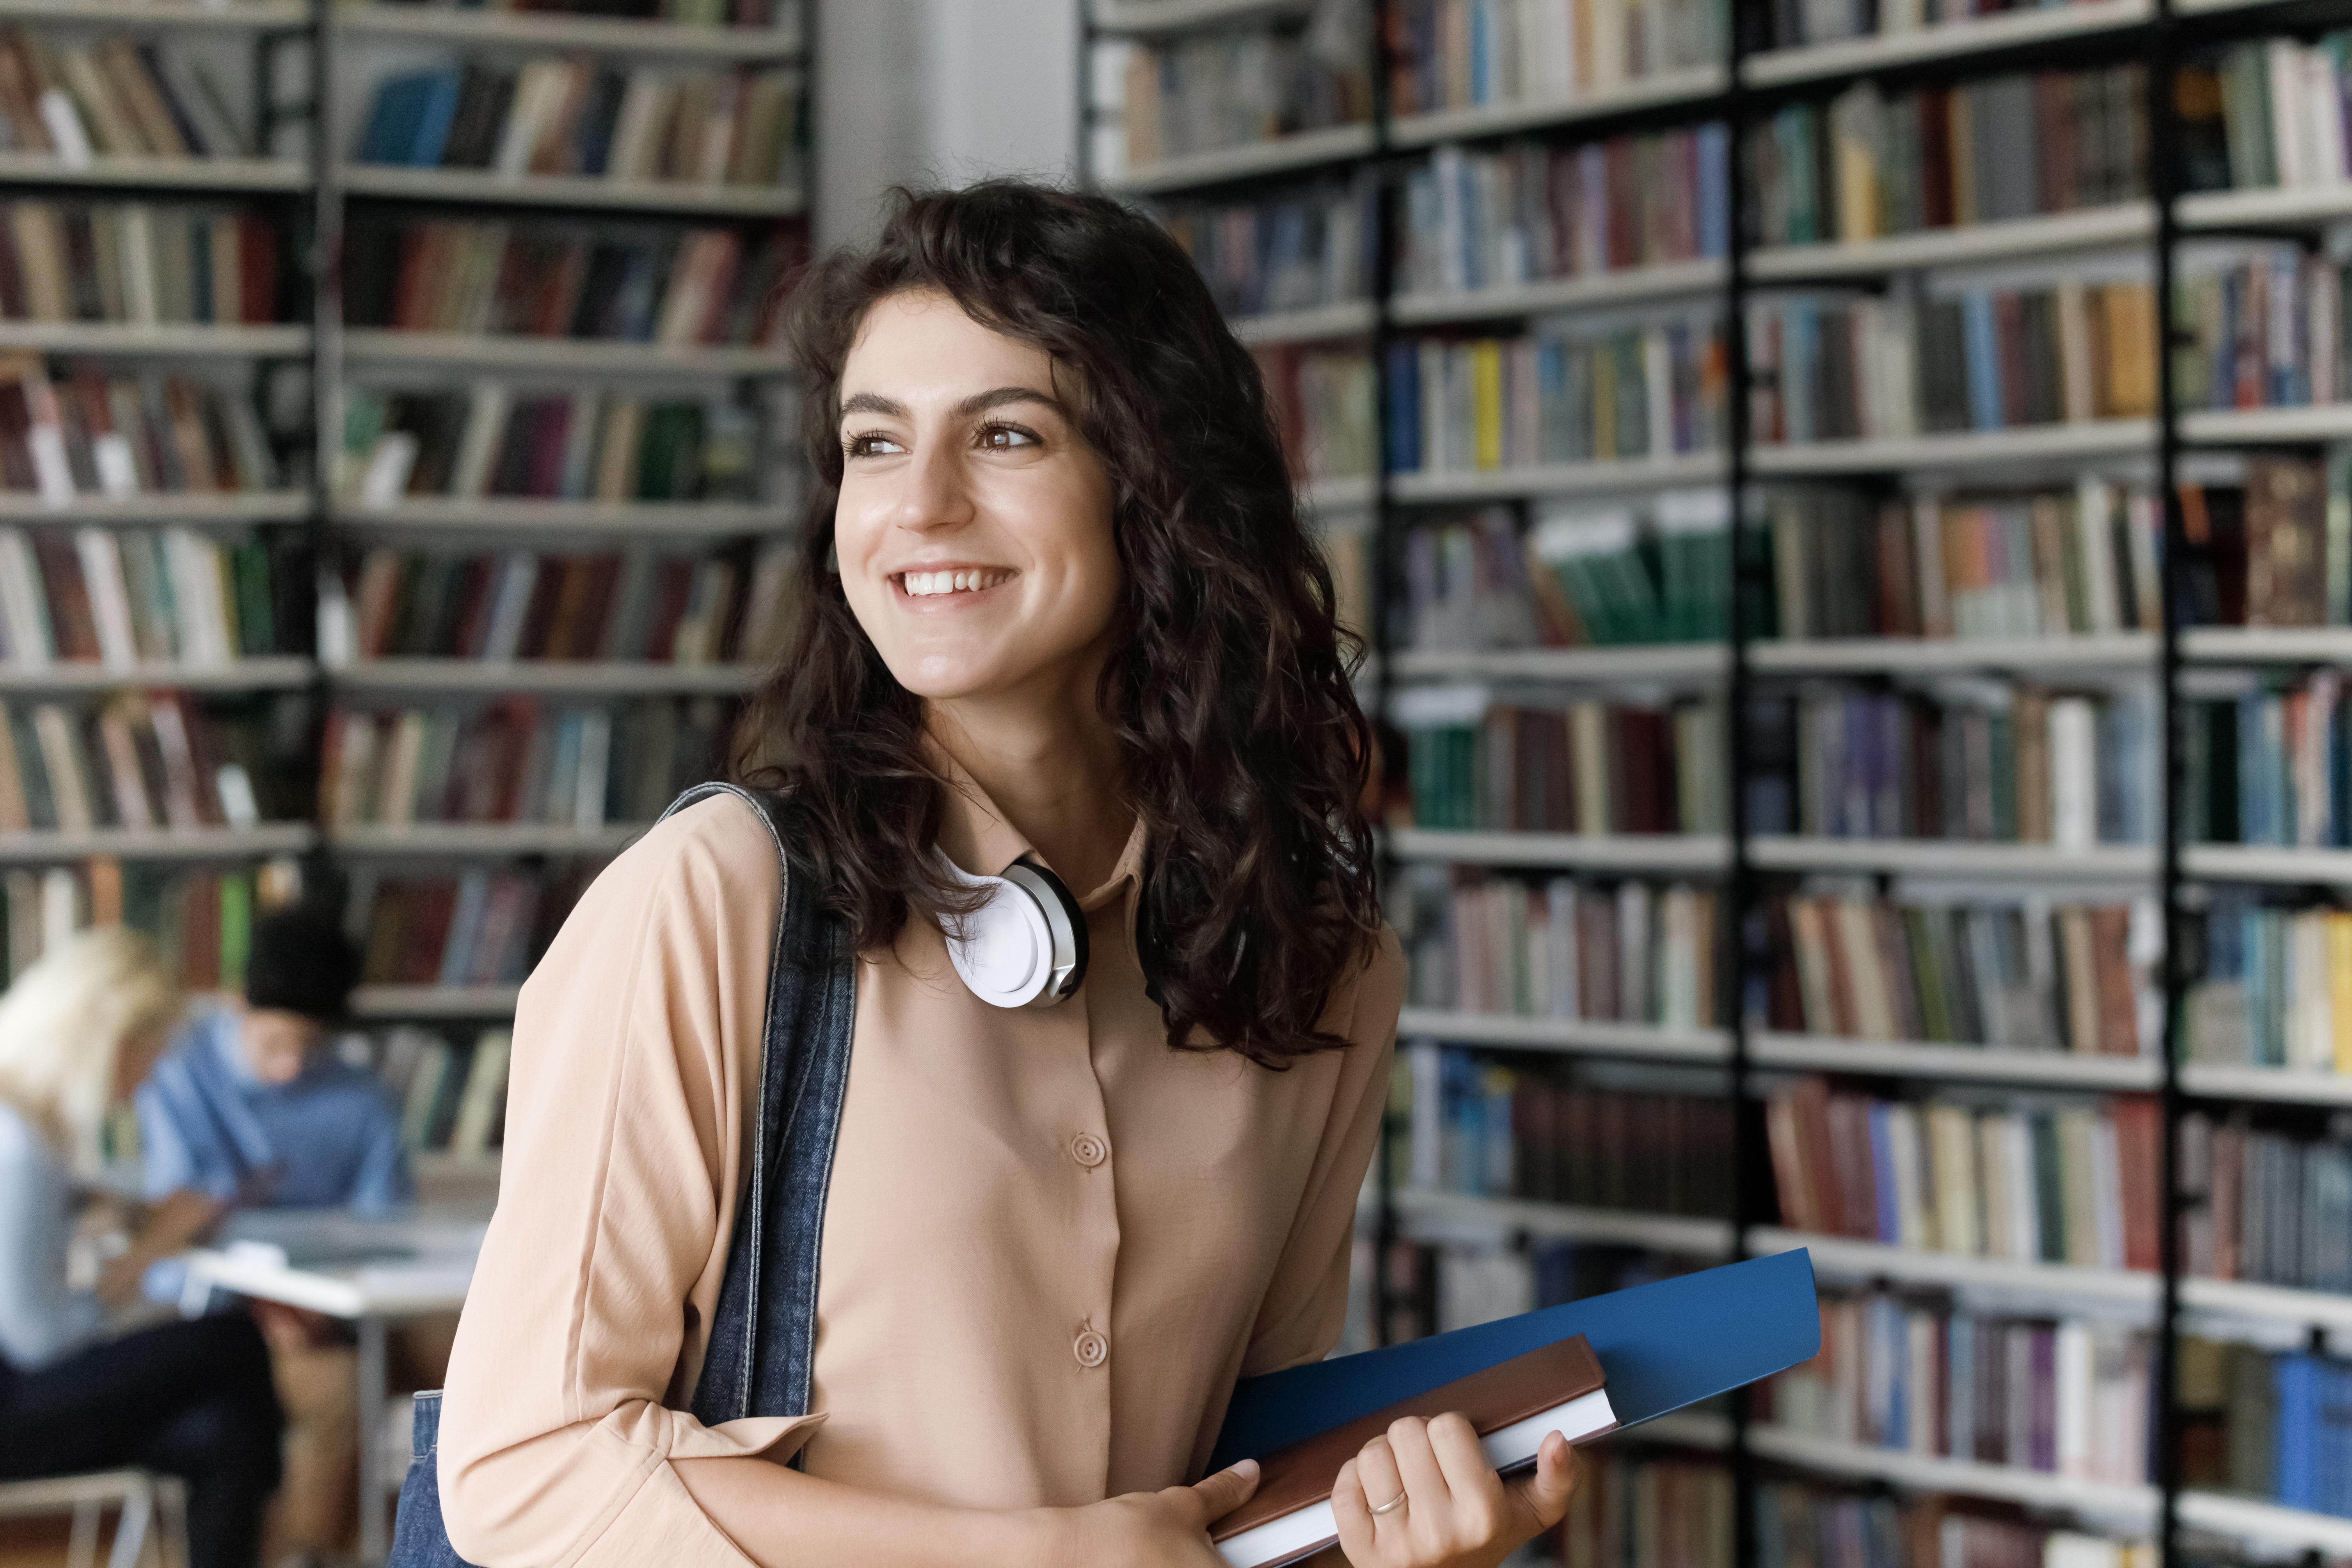 A happy girl standing in a library | Source: Shutterstock